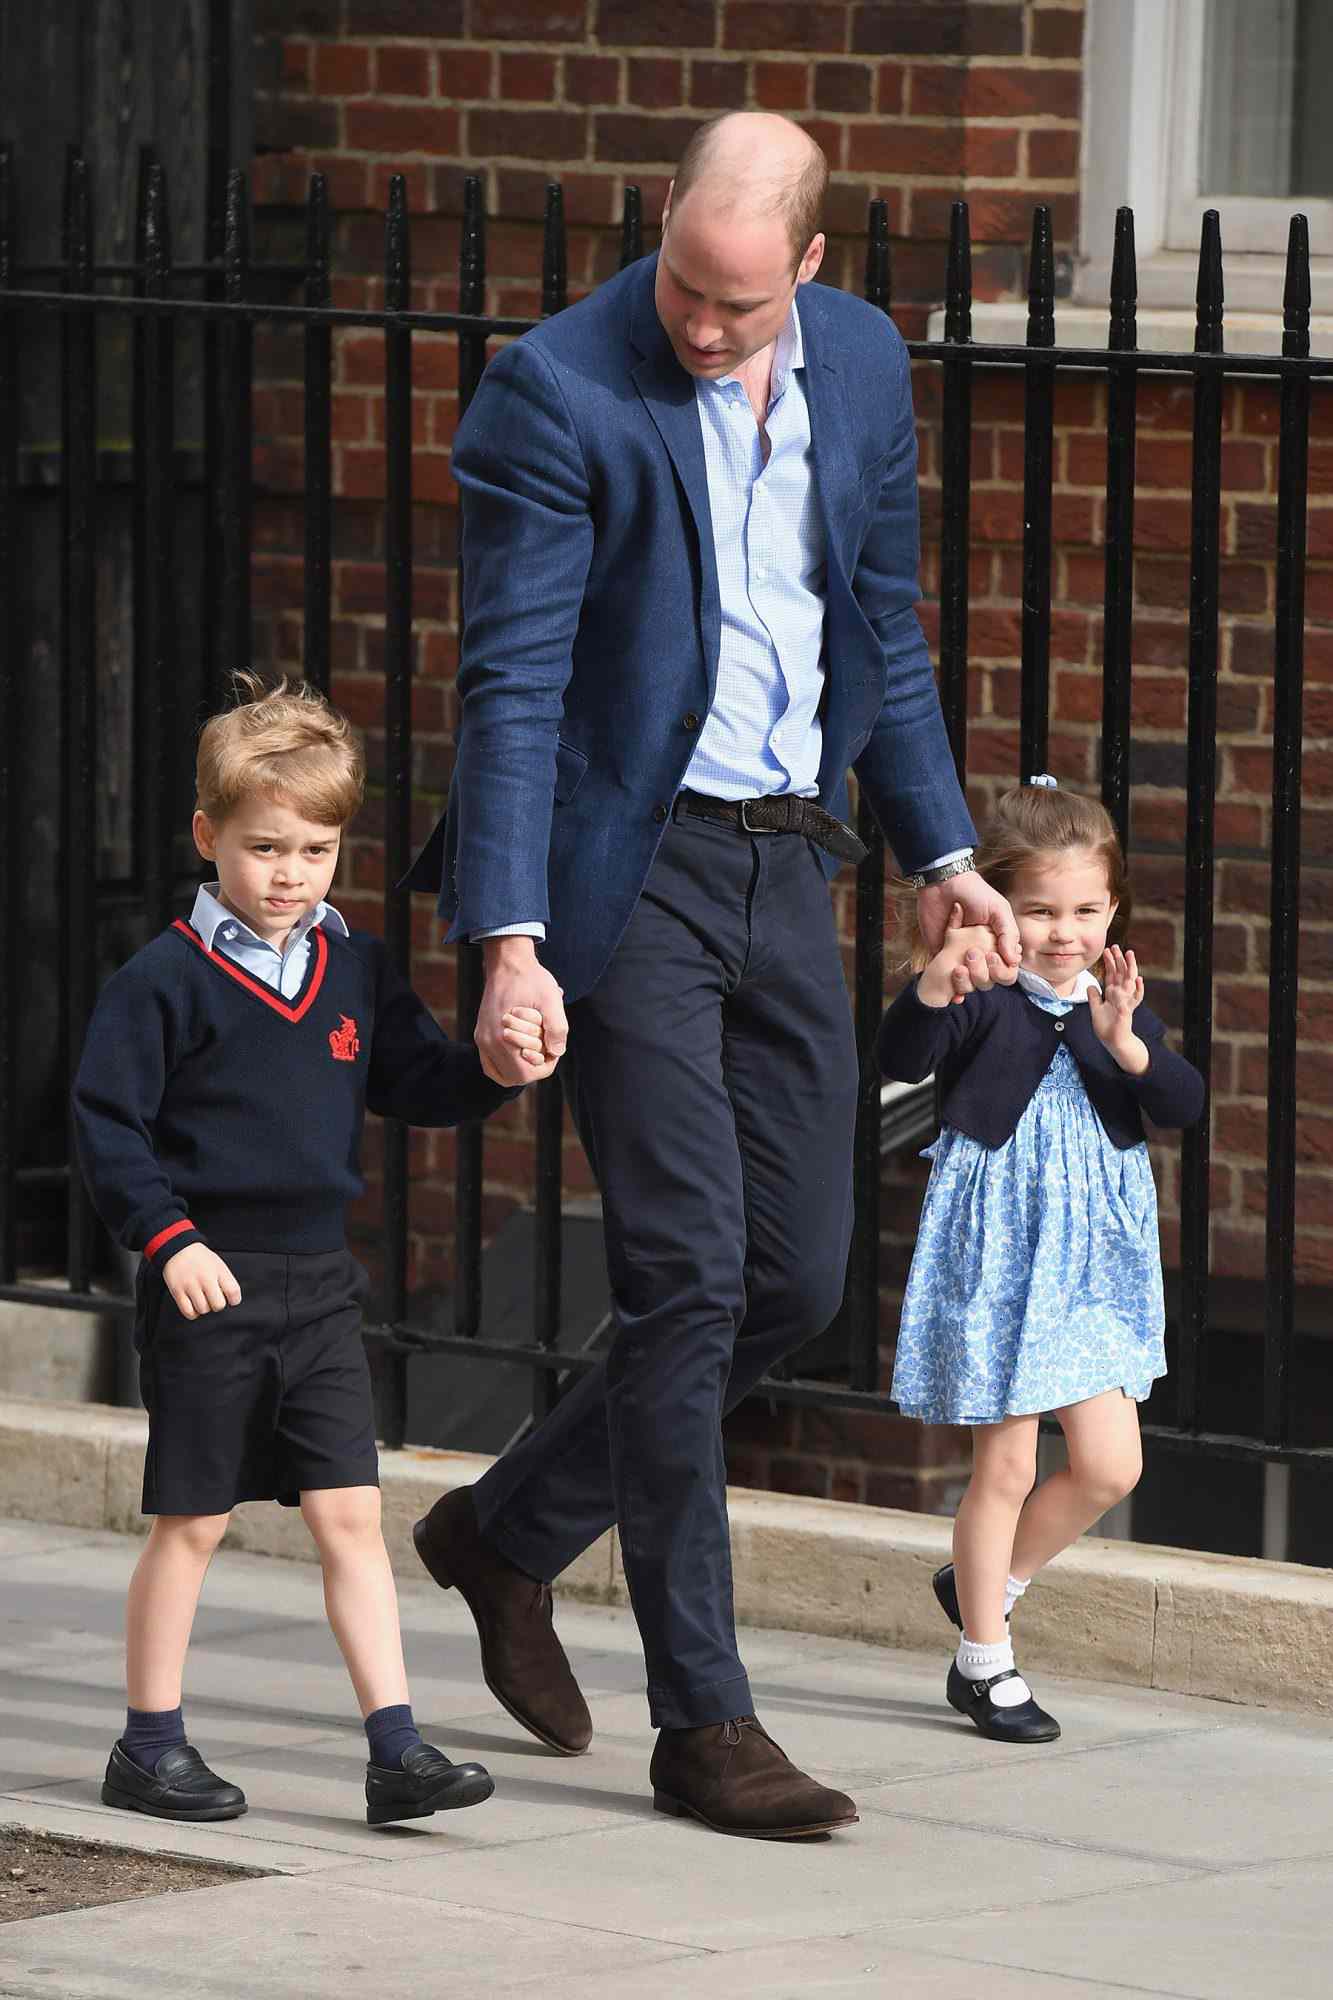 The Duke & Duchess Of Cambridge Depart The Lindo Wing With Their Baby Boy